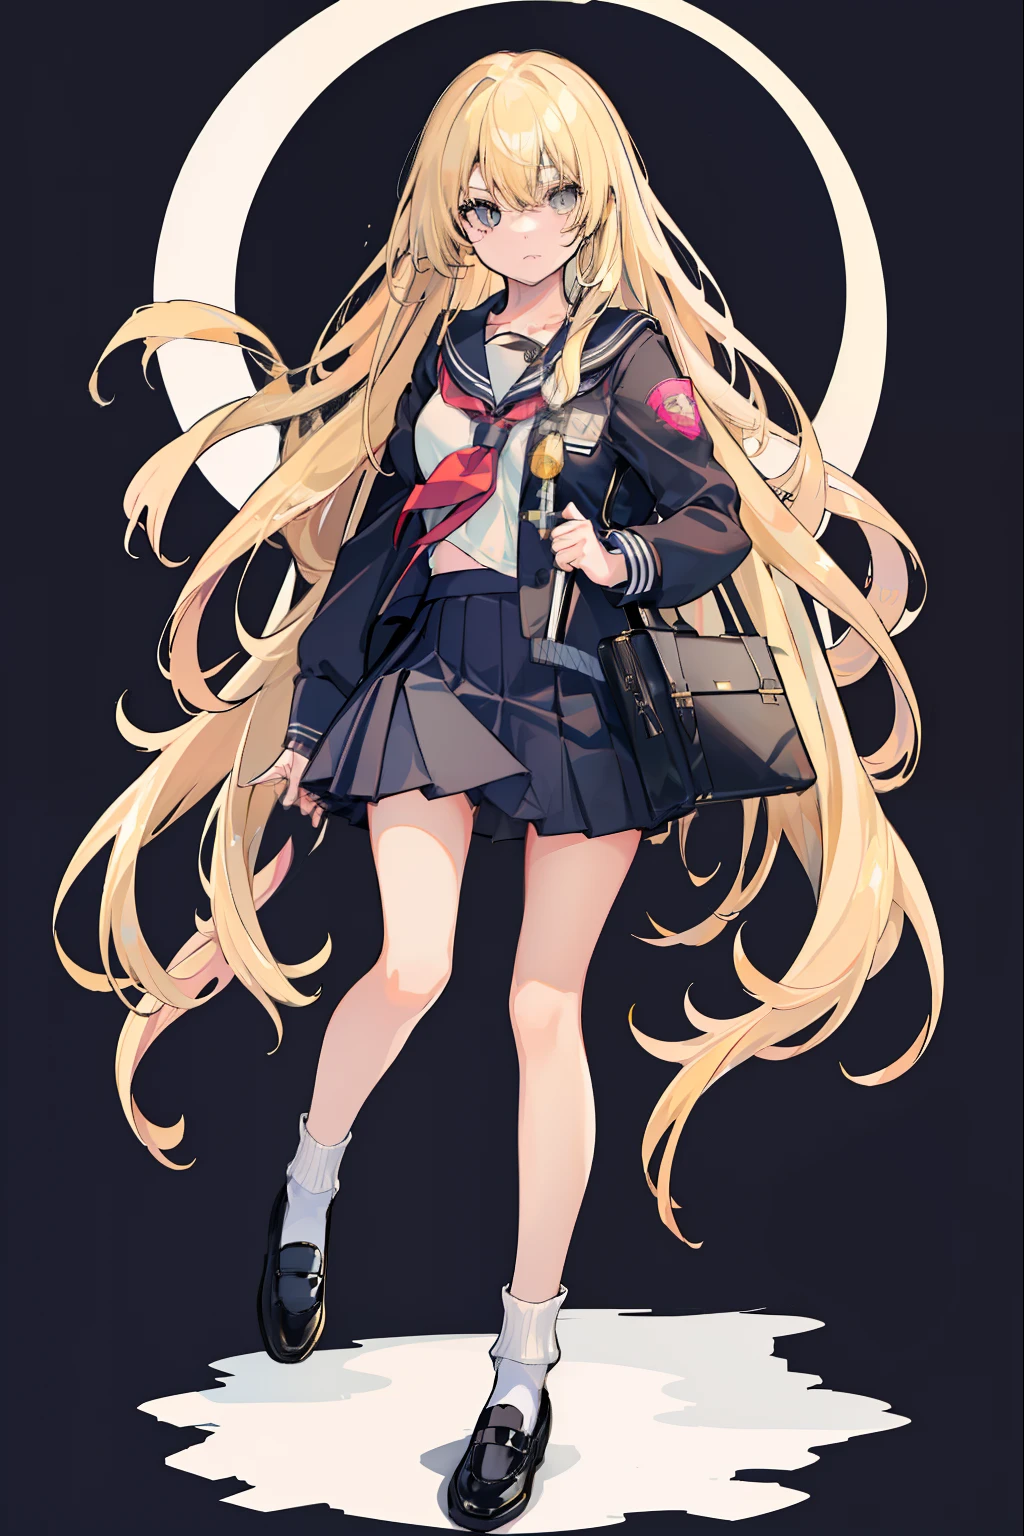 Depiction of a young woman with 長い髪 holding a briefcase, 女の子1人, 一人で, marisa kirisame, , gohei, スカート, 靴, 熾天使, 白いセーラー服, 靴下, メリージェーン, 学歴, 異なる衣装, 長袖, ブロンド, 全身, 視聴者を見る, 長い髪